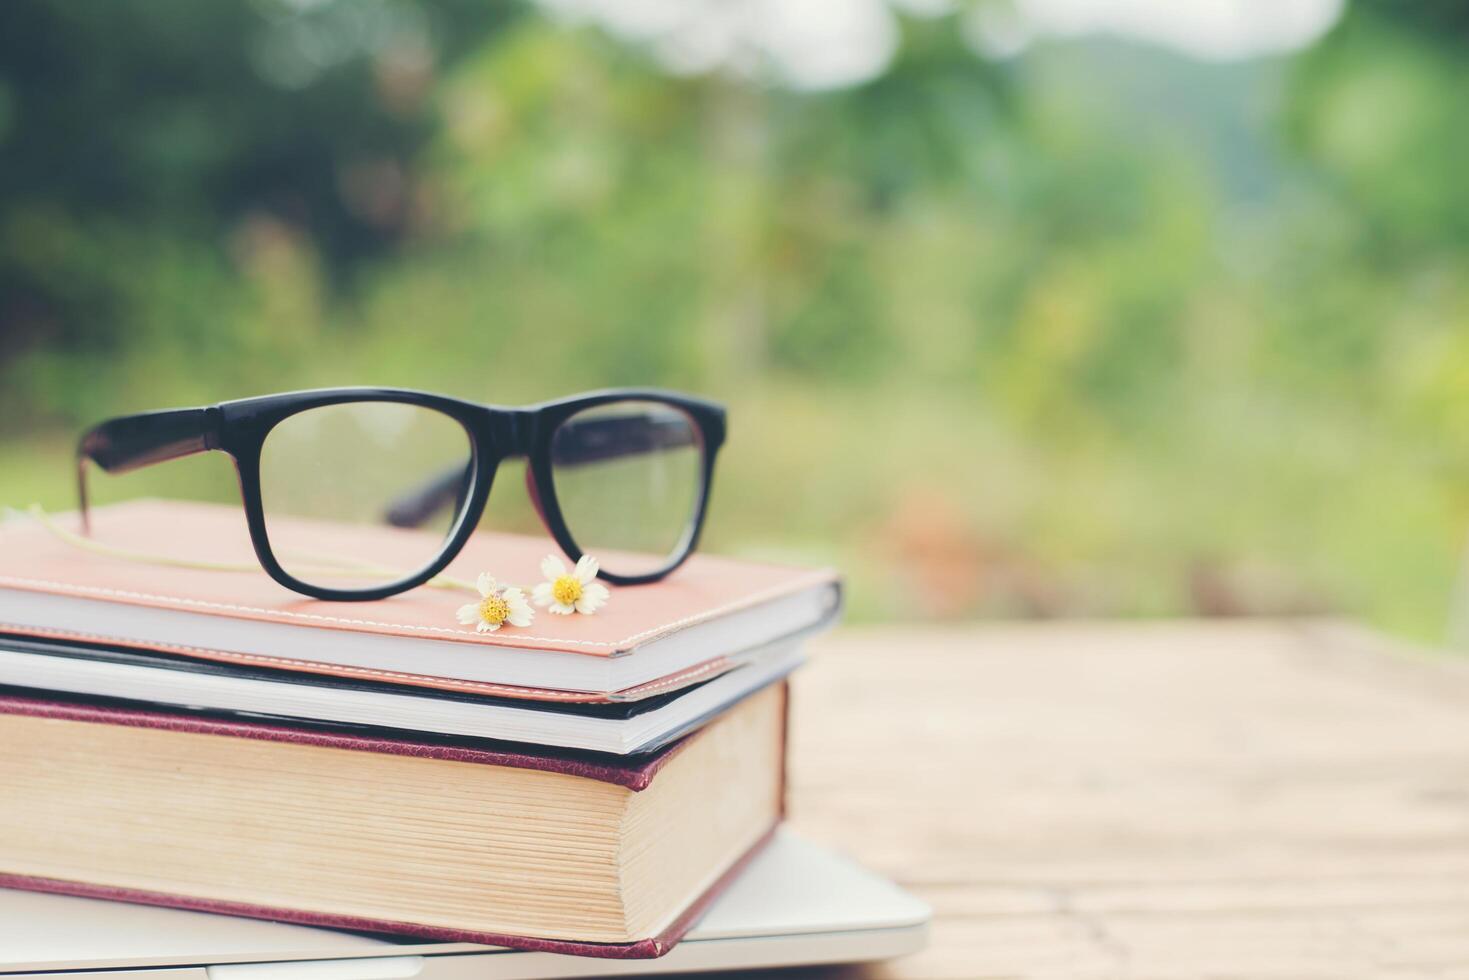 Book and eye glasses for read and write over blurred nature outdoor background. photo